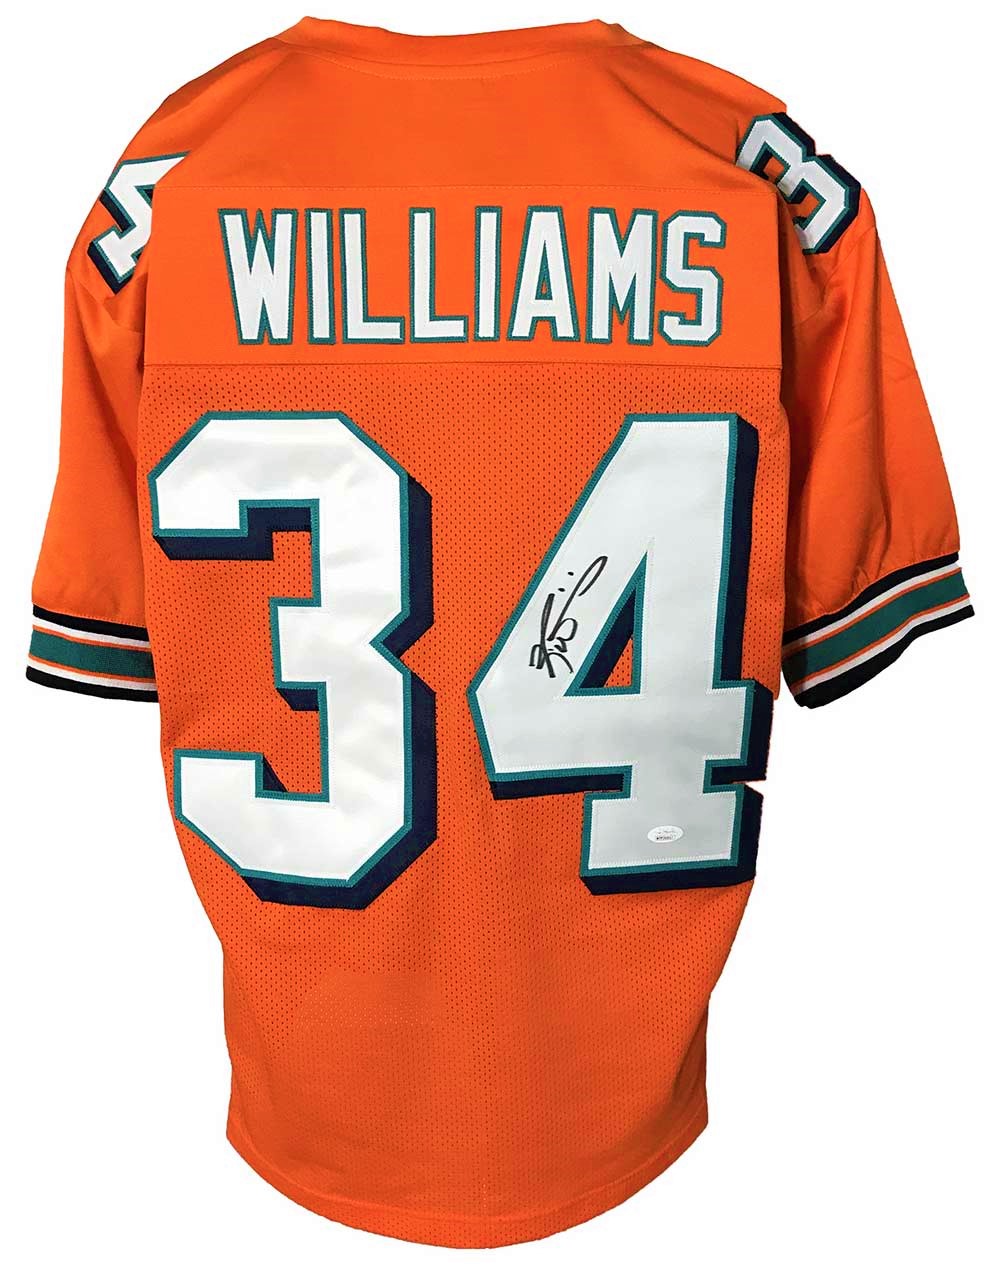 Miami Dolphins Ricky Williams Autographed Pro Style Orange Jersey BECKETT Authenticated